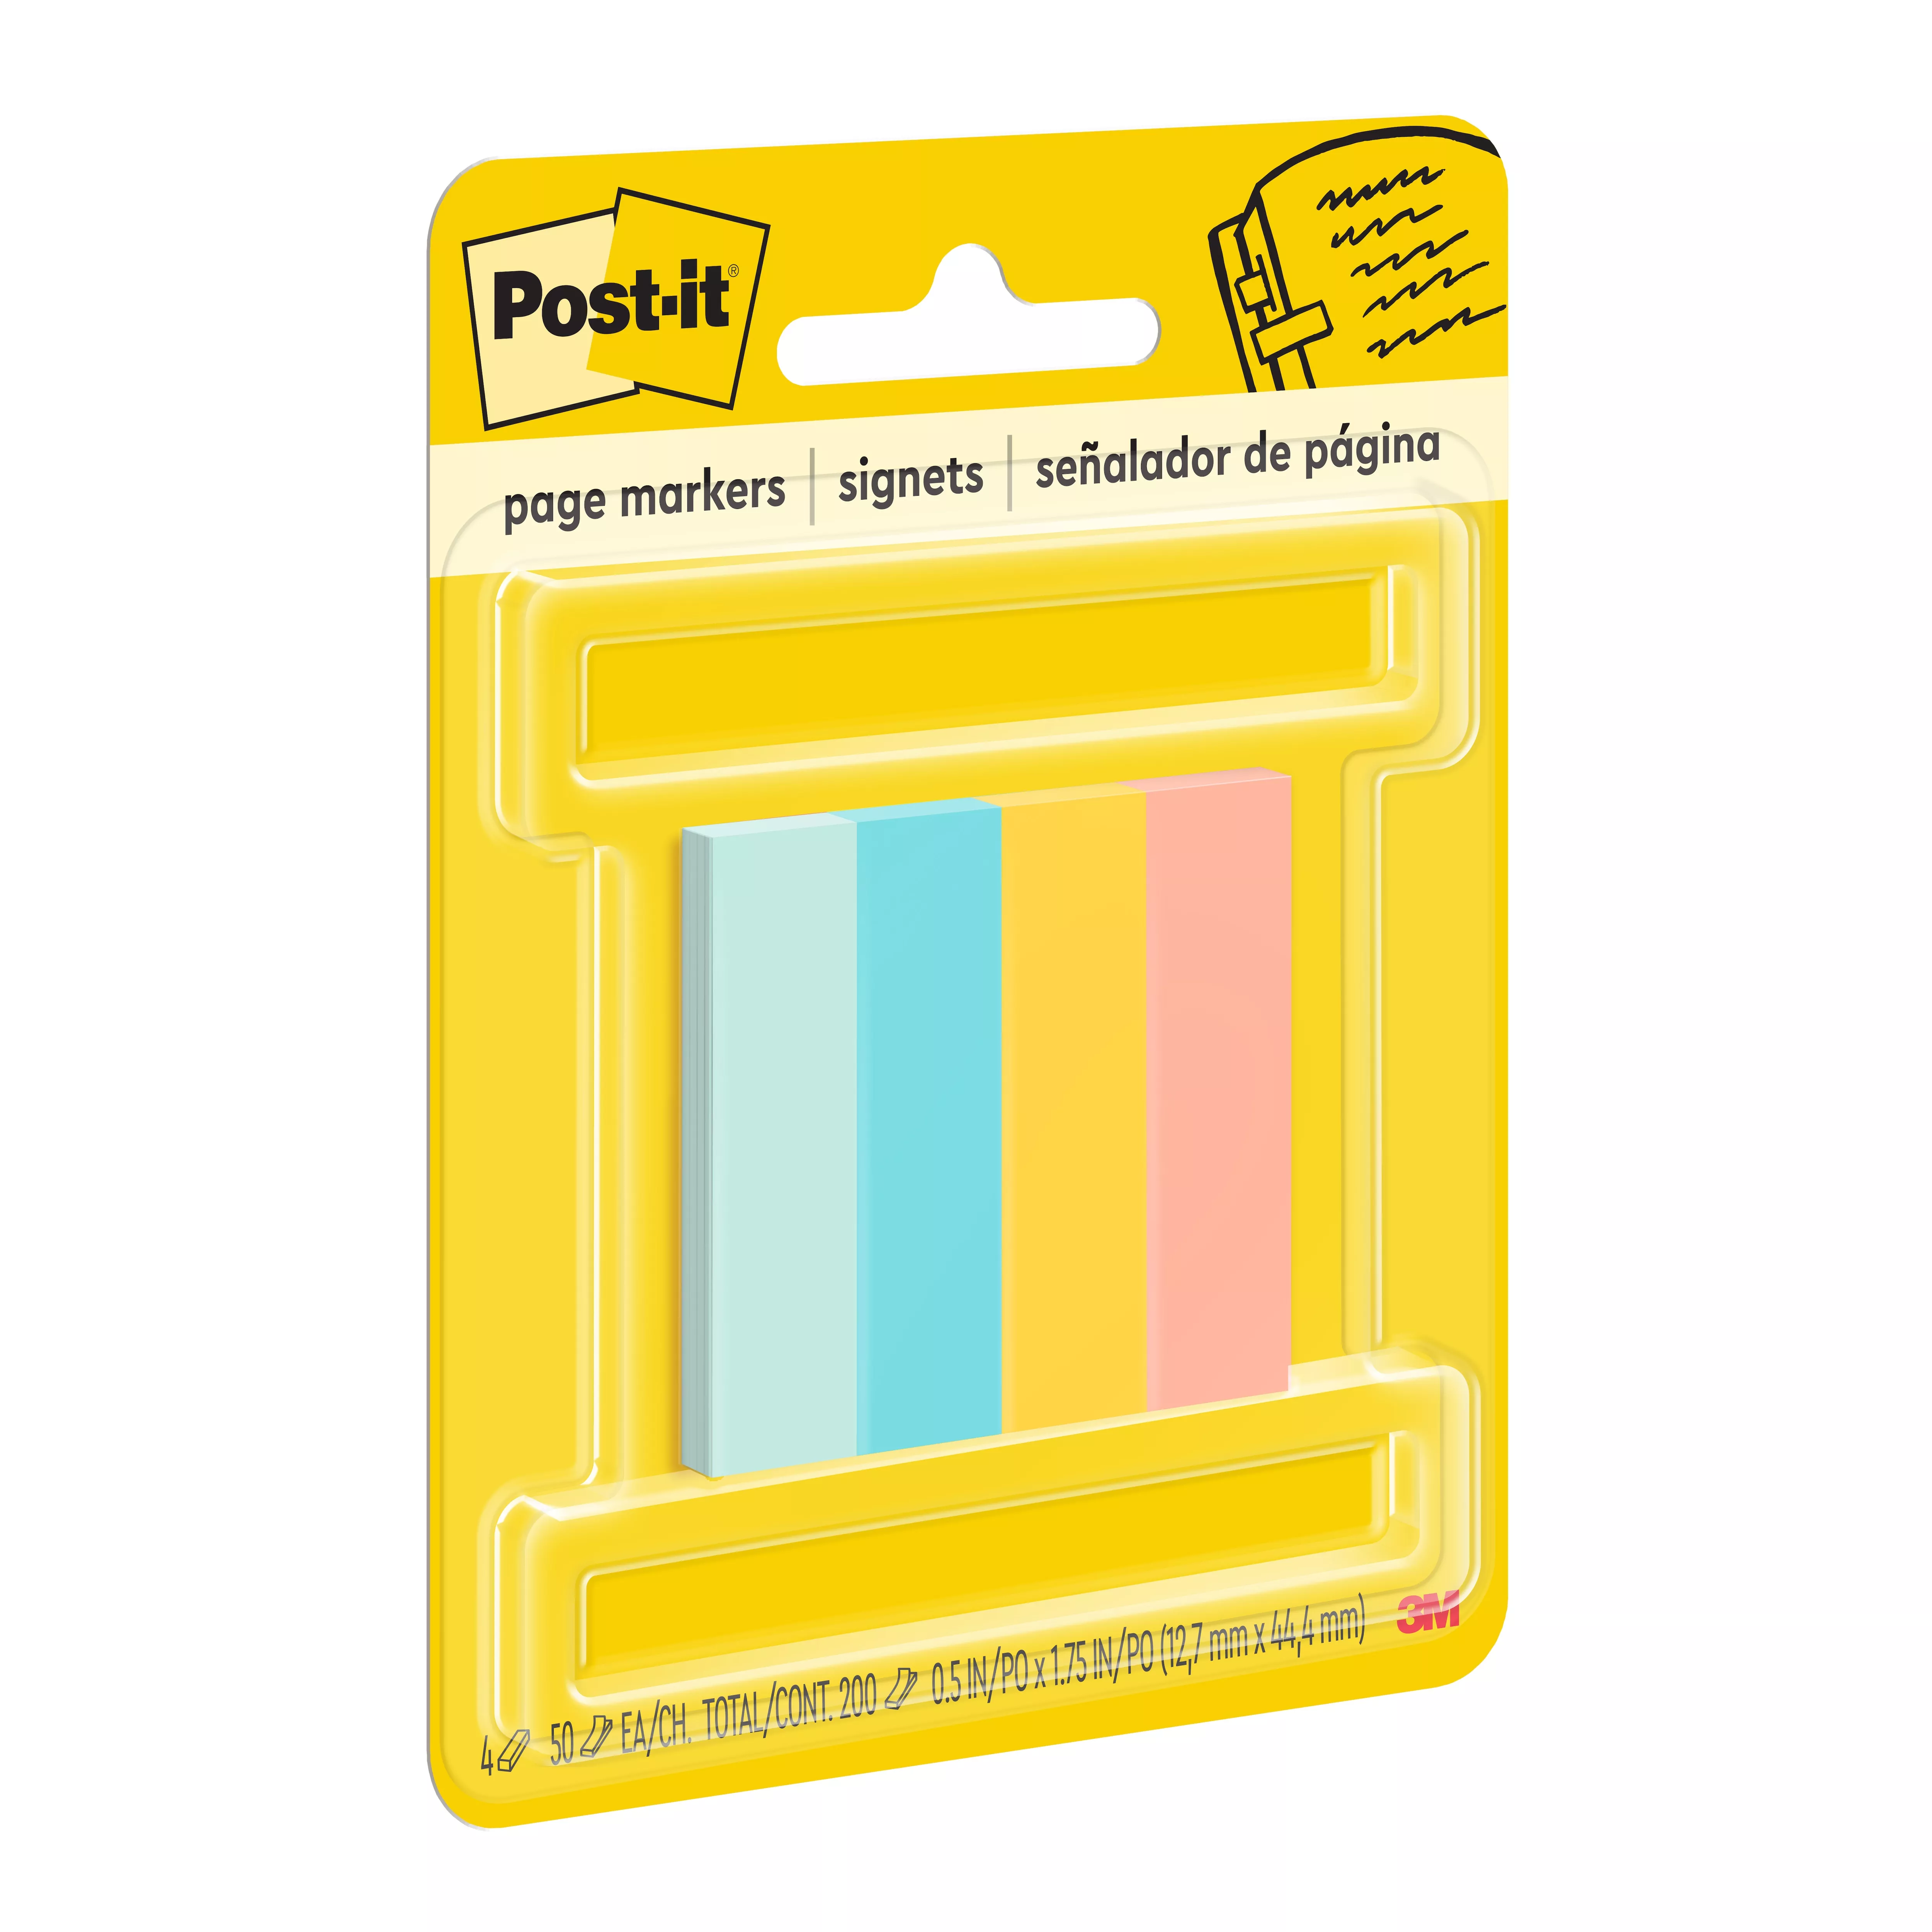 Product Number 670-4-D | Post-it® Page Marker 670-4-D